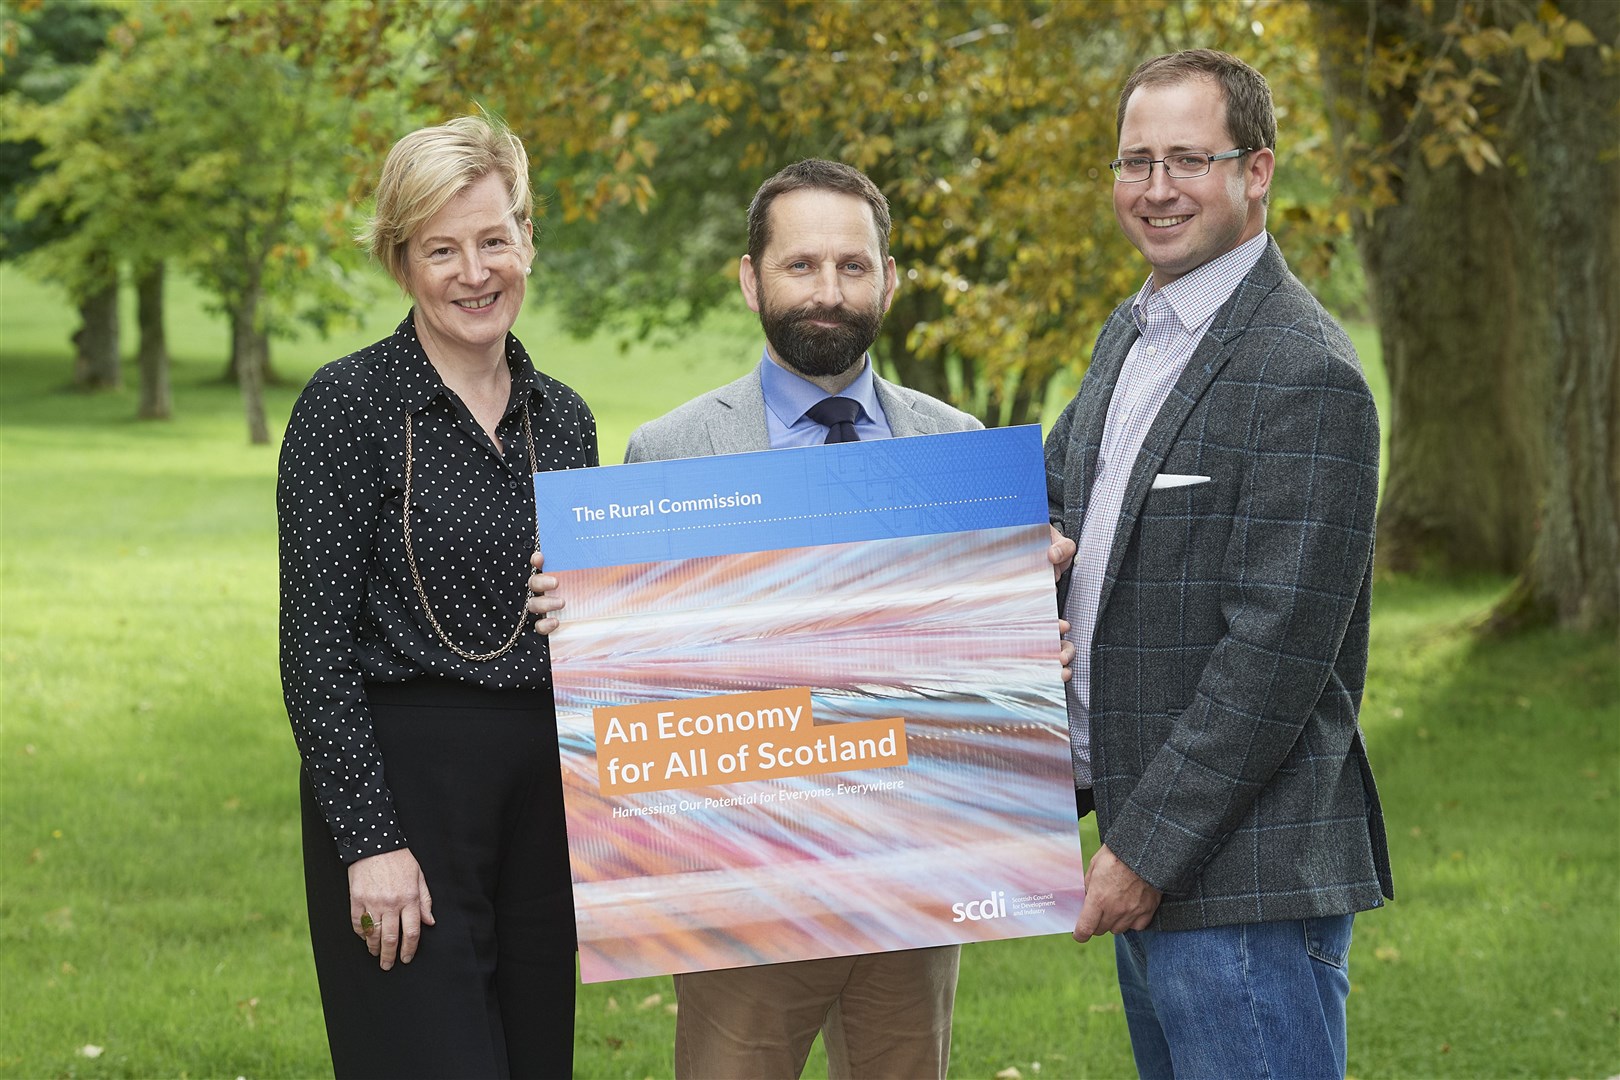 SDCI chief executive Sara Thiam, SCDI Rural Commission chairman Chris Gaffney and SCDI Highlands and Islands regional director Fraser Grieve launch the report.